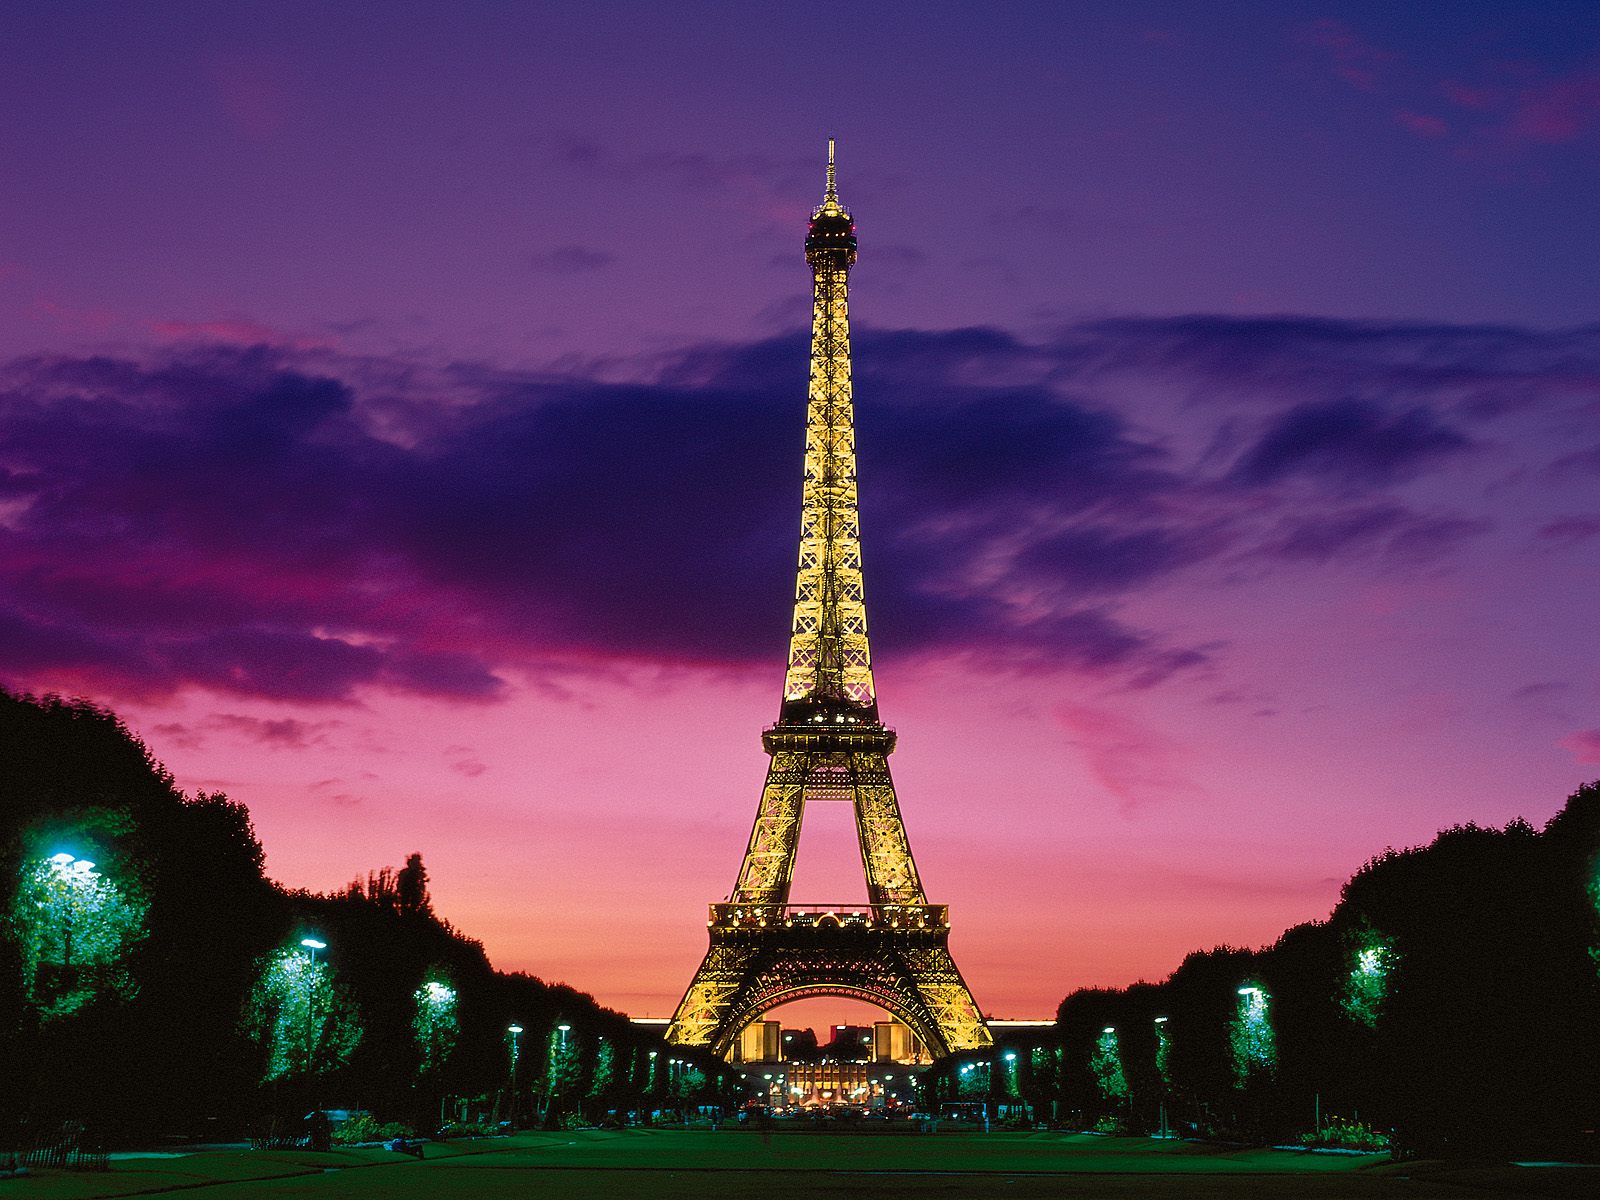 Eiffel Tower at Night Paris France Wallpapers | HD Wallpapers | ID #6019